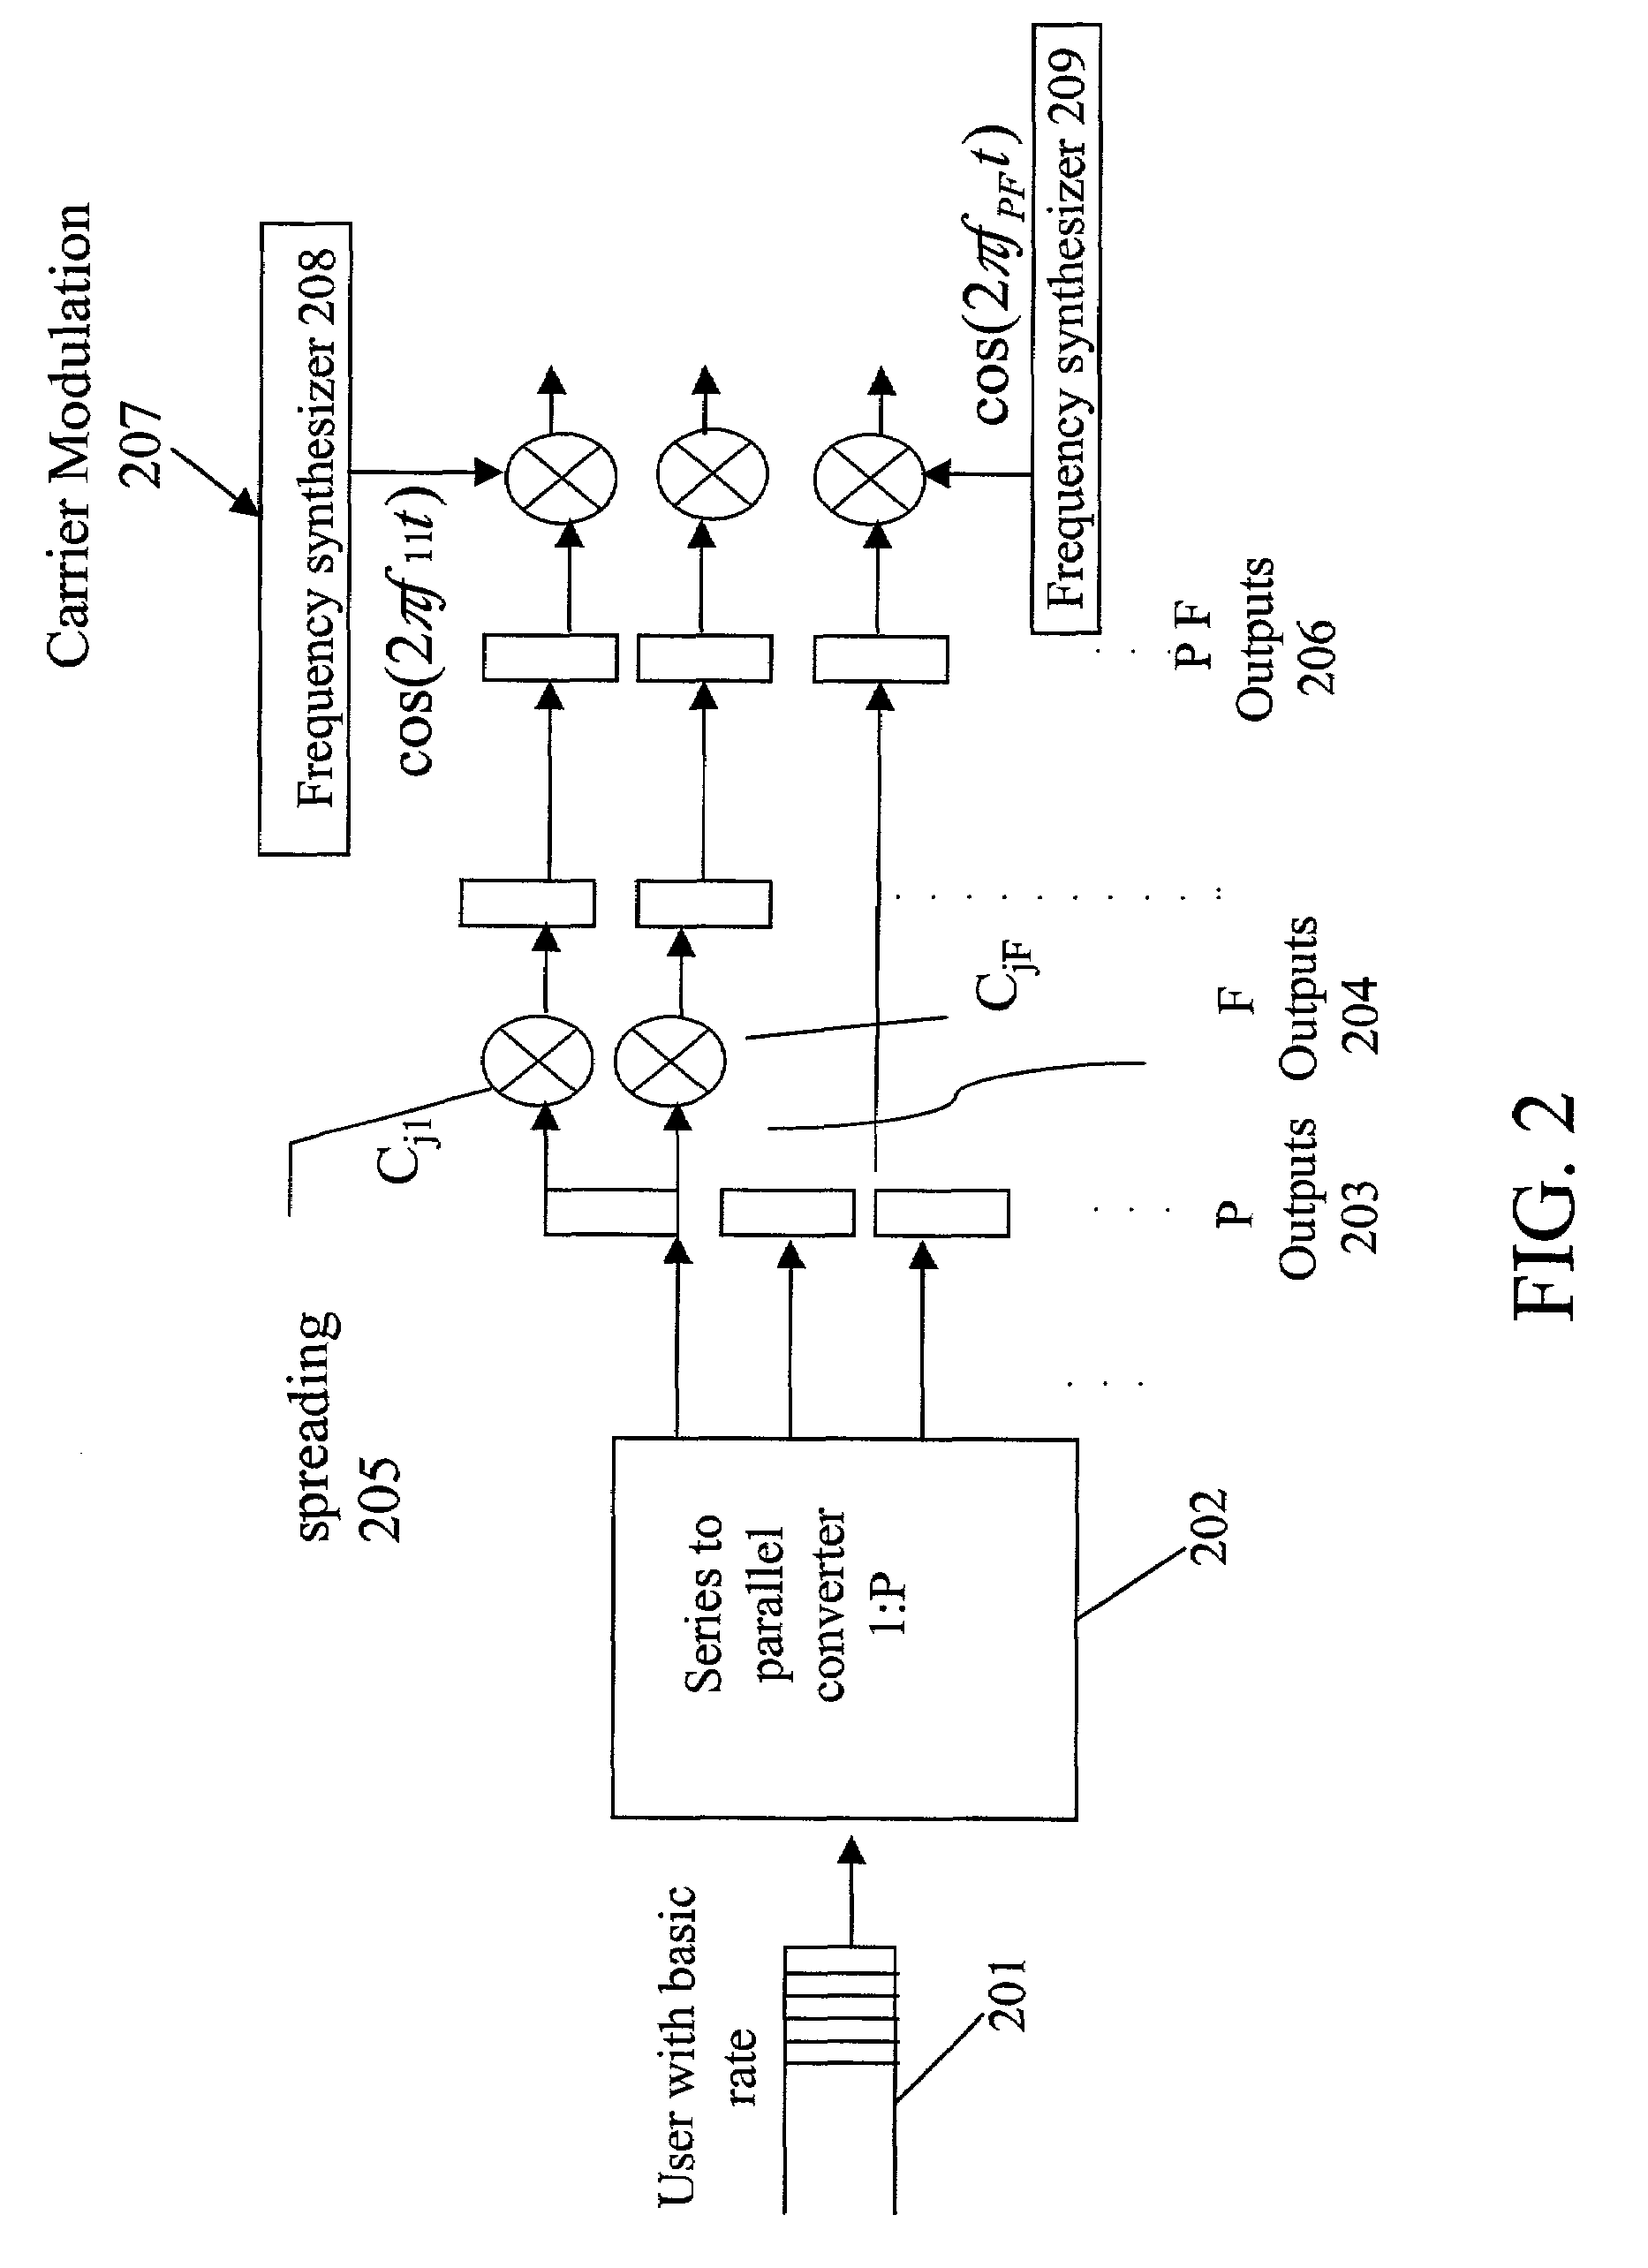 Programmable transceiver structure of multi-rate OFDM-CDMA for wireless multimedia communications